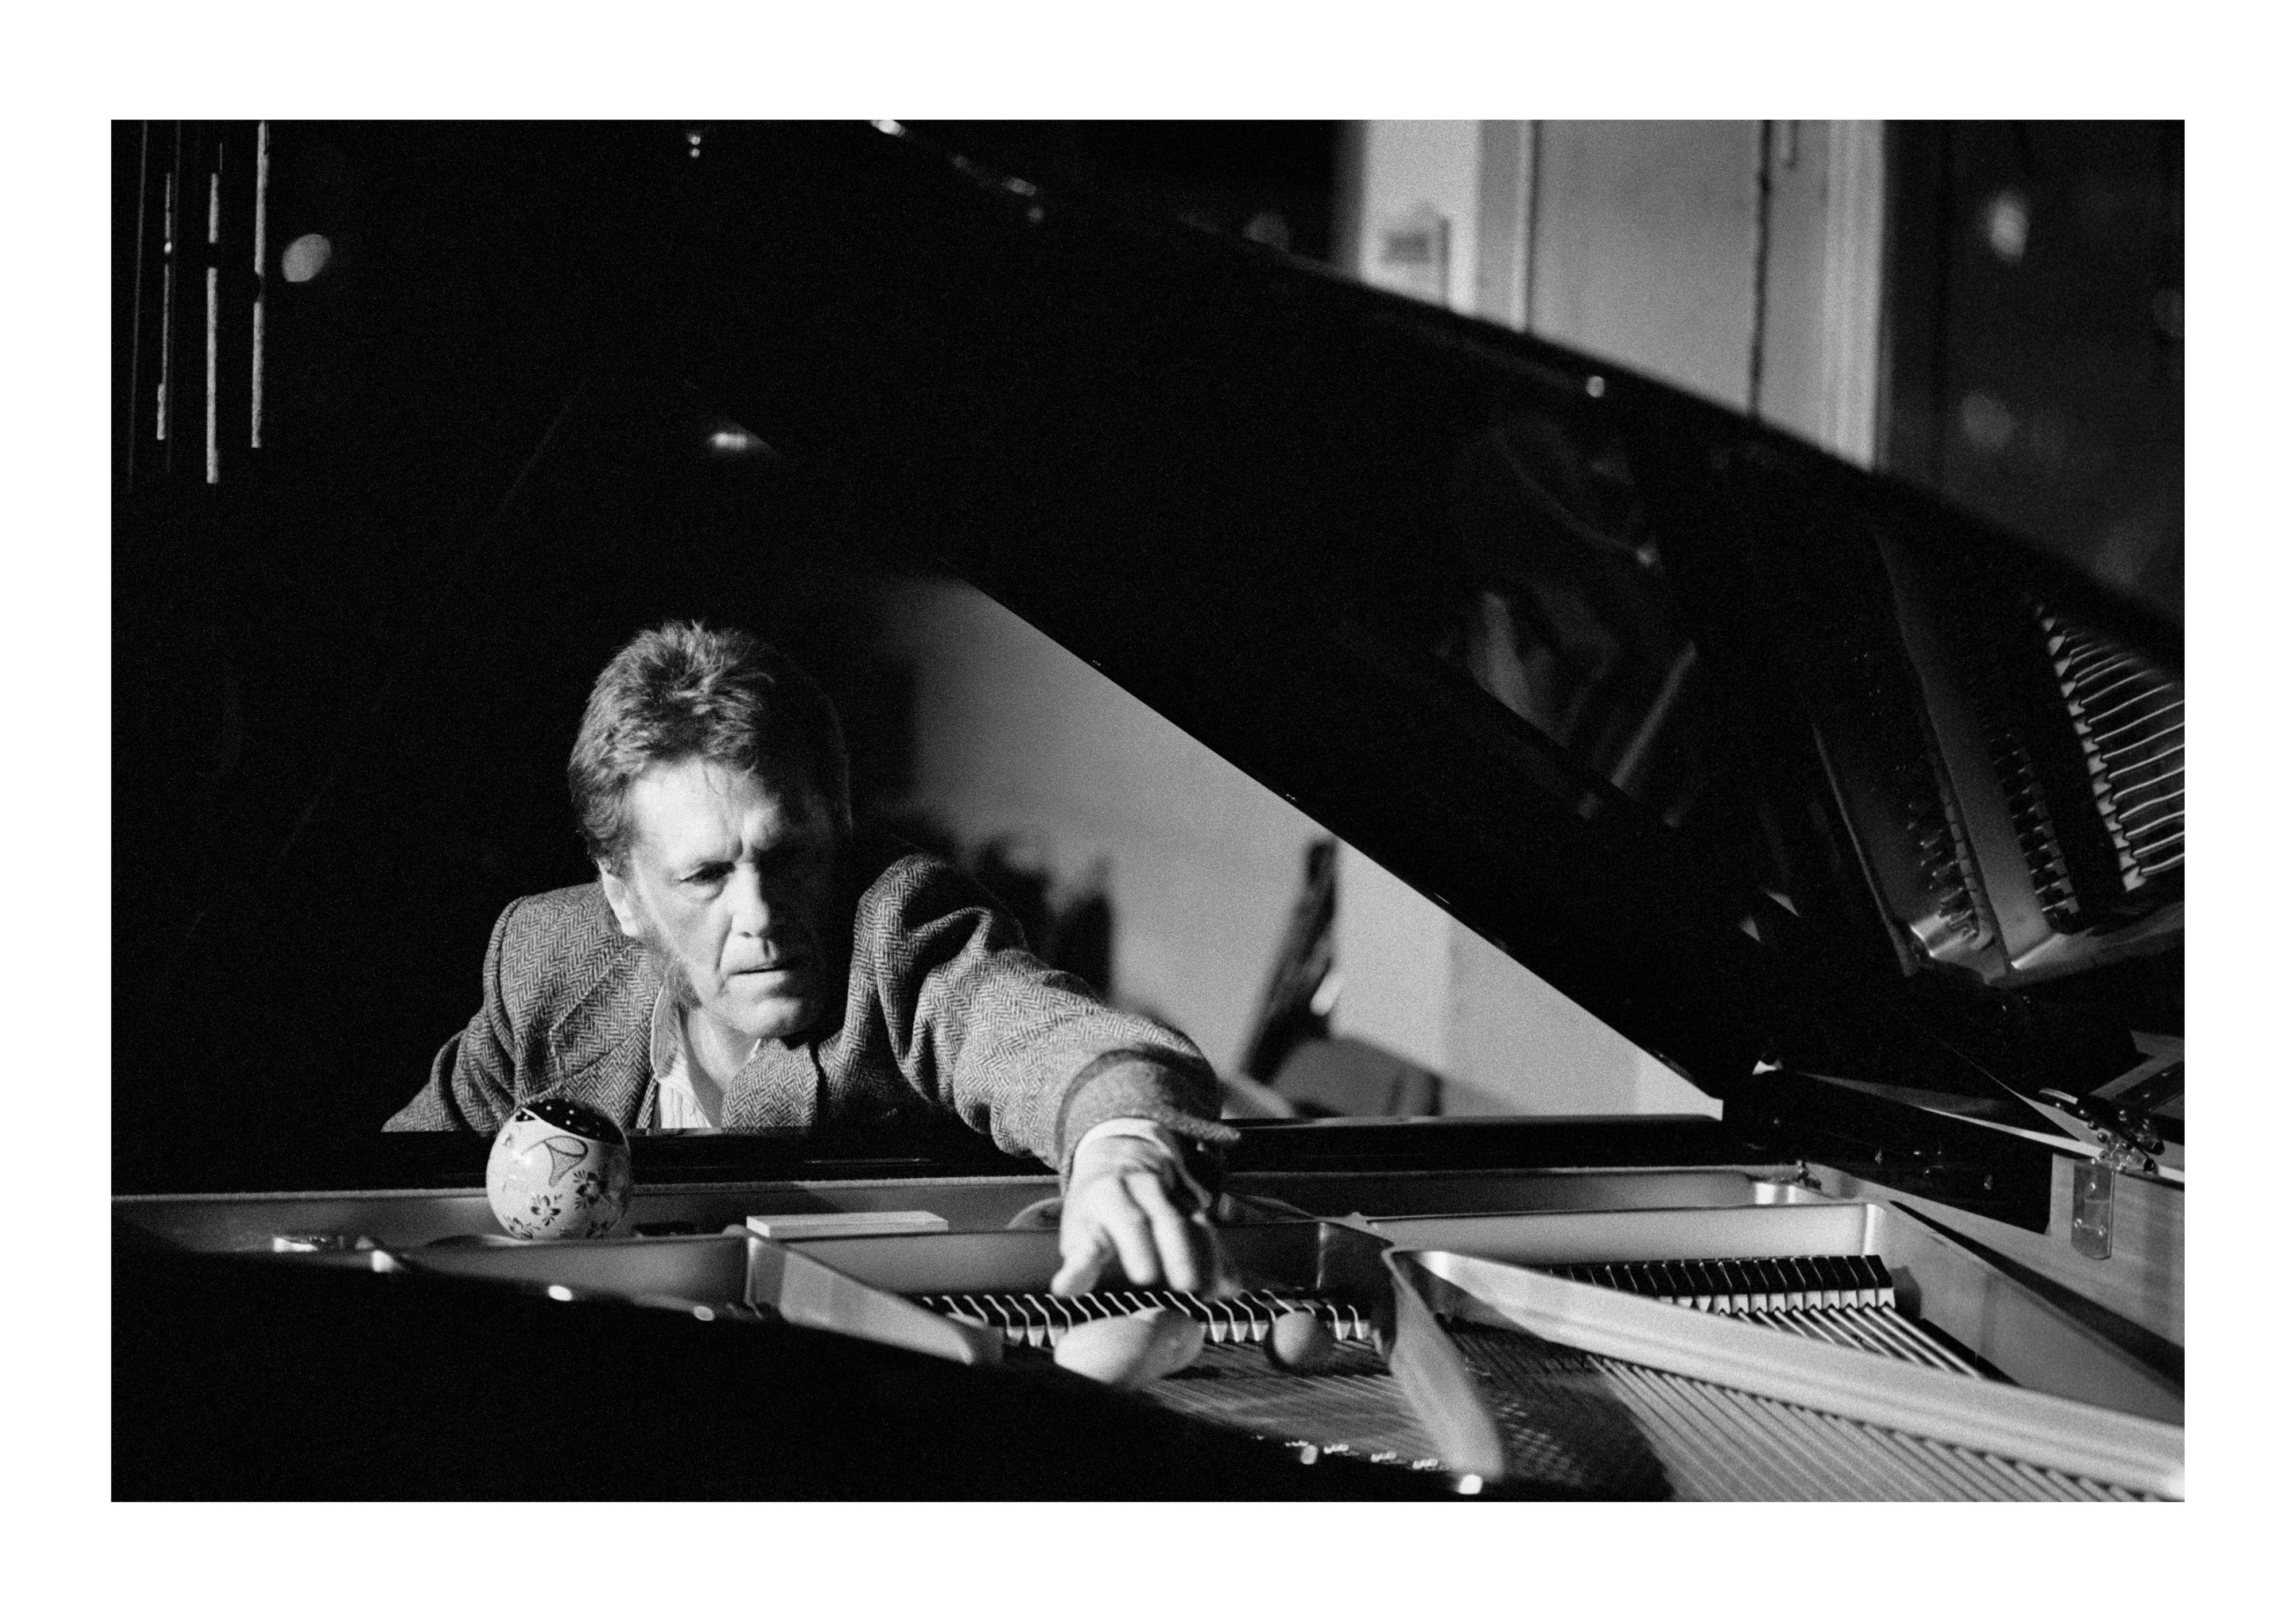 British jazz pianist and composer Keith Tippett, October 2000